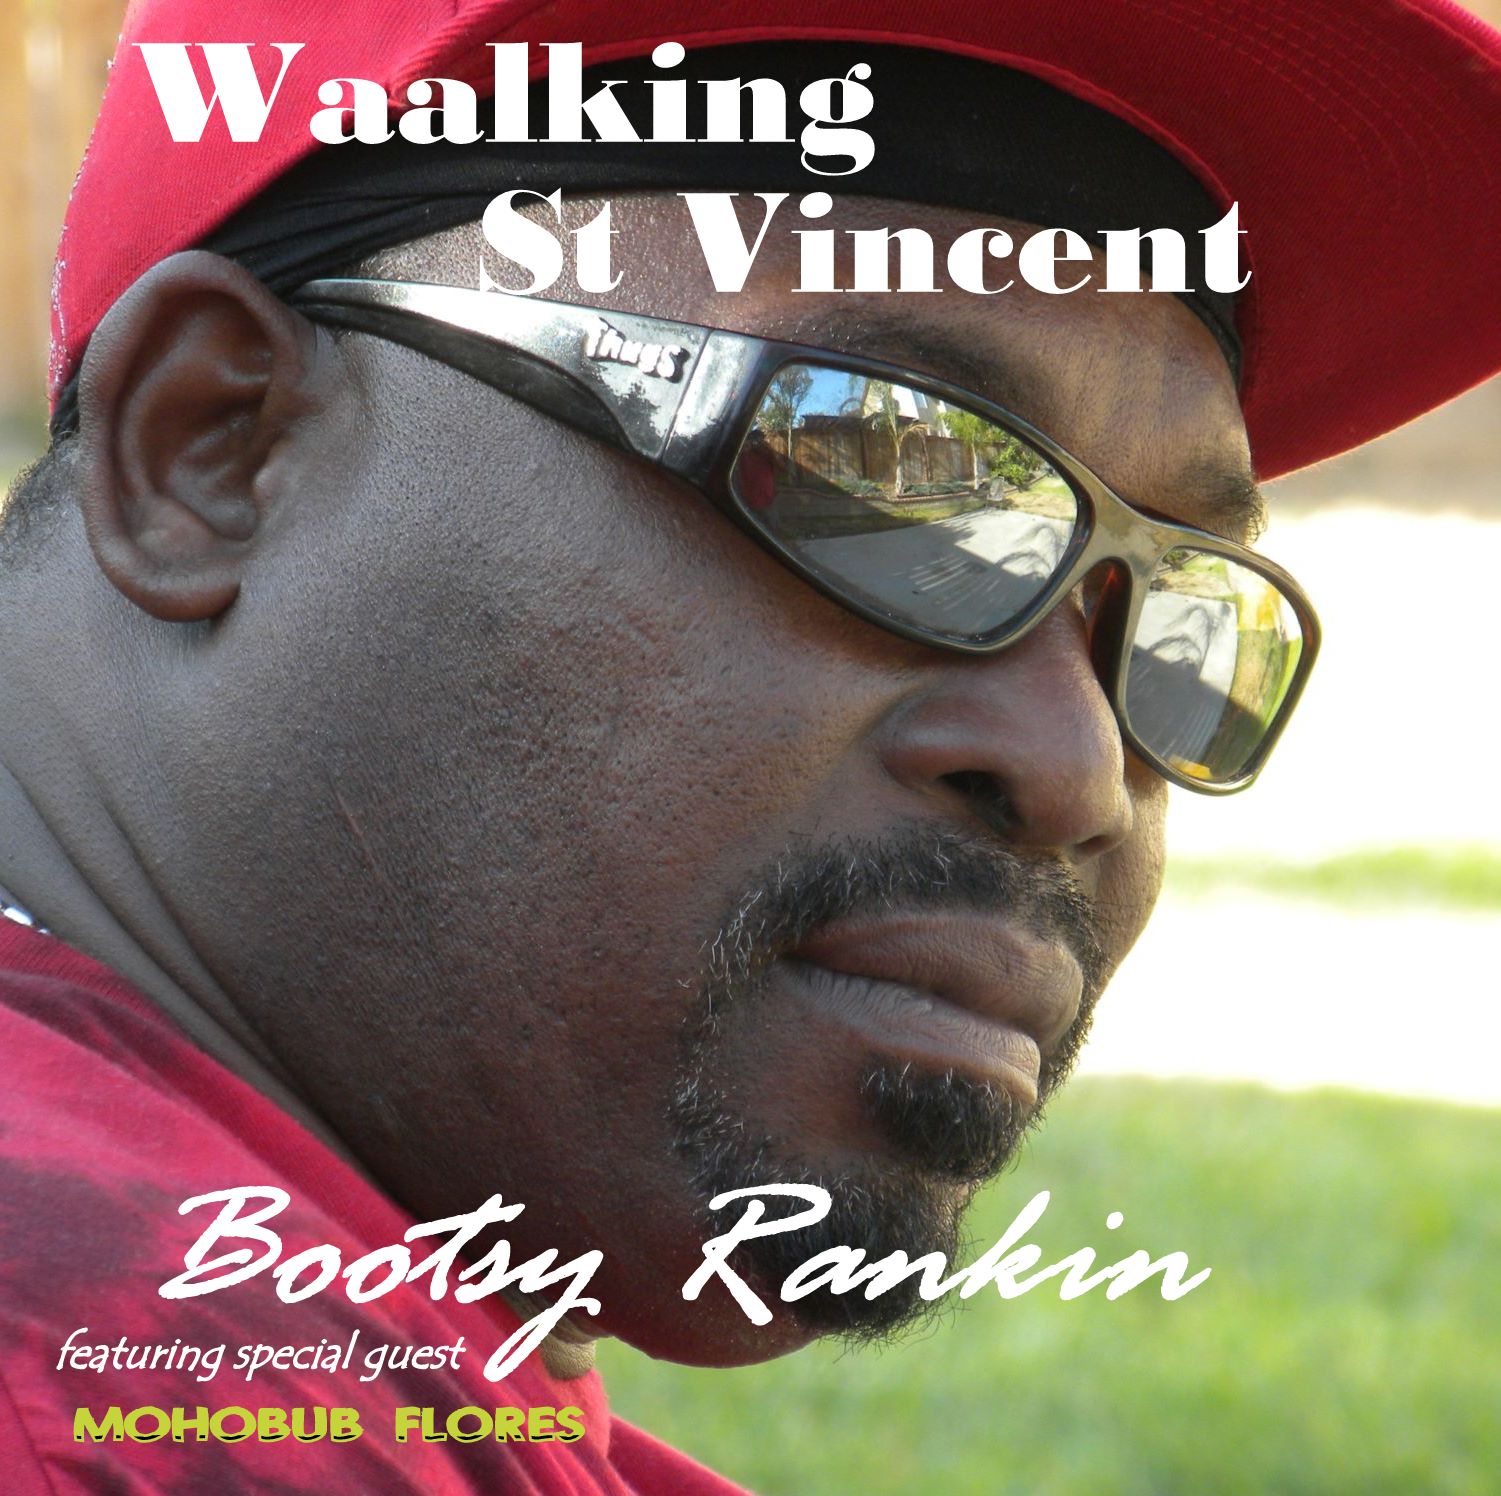 Bootsy Rankin featuring special guest MOHOBUB FLORES, "Waalking St Vincent: Produced by: Bill Cayetano for Sellis Records Productions